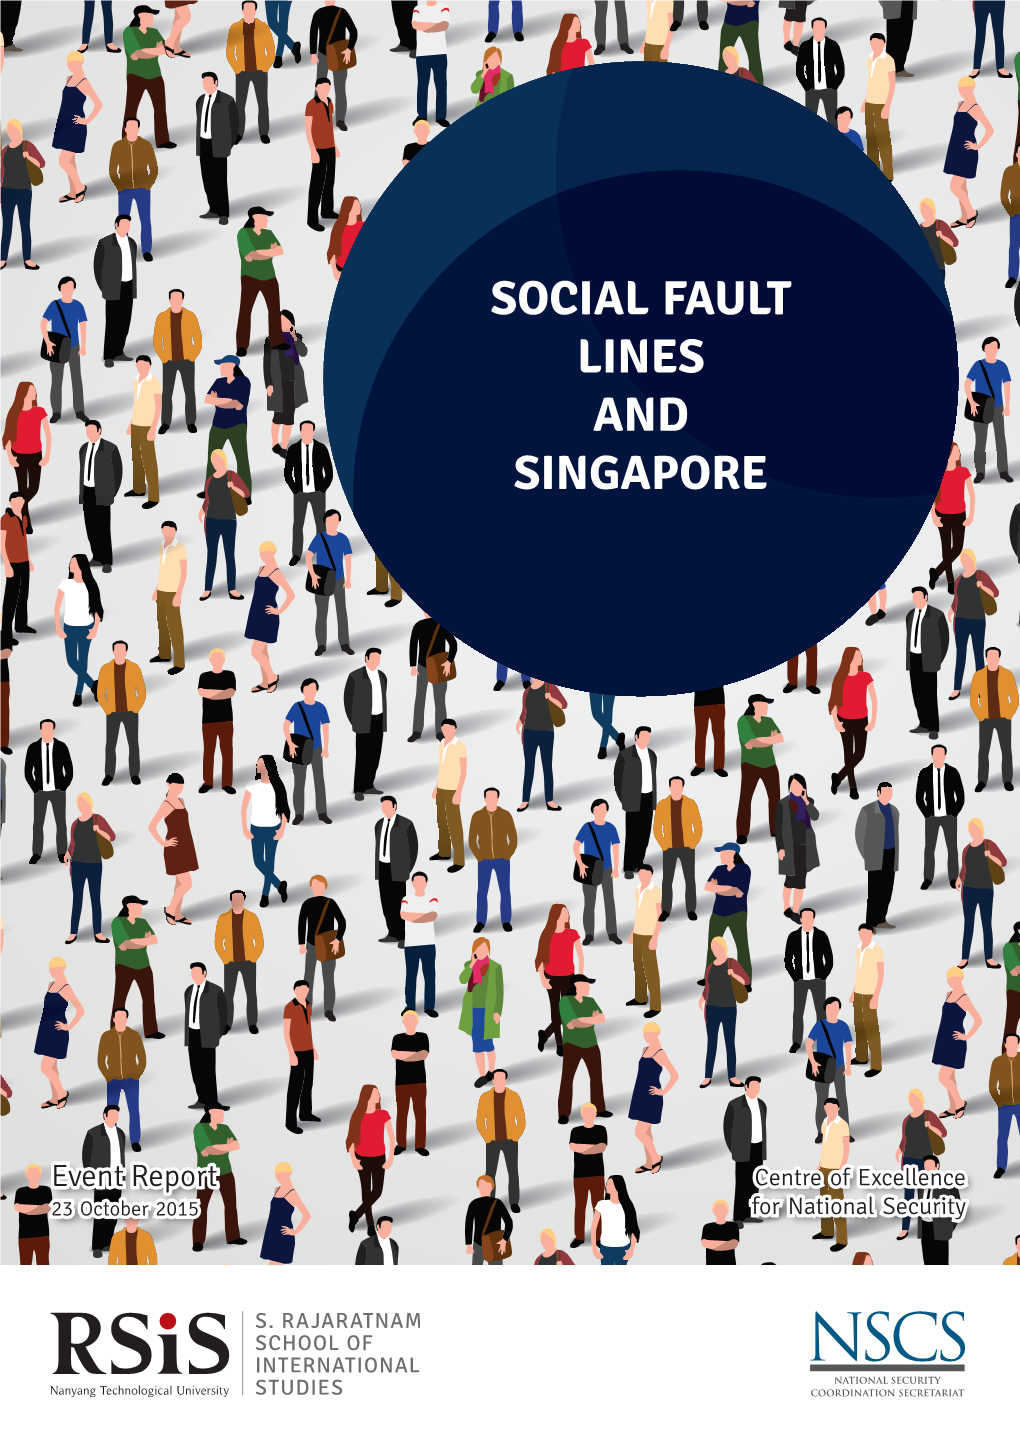 Social Fault Lines and Singapore